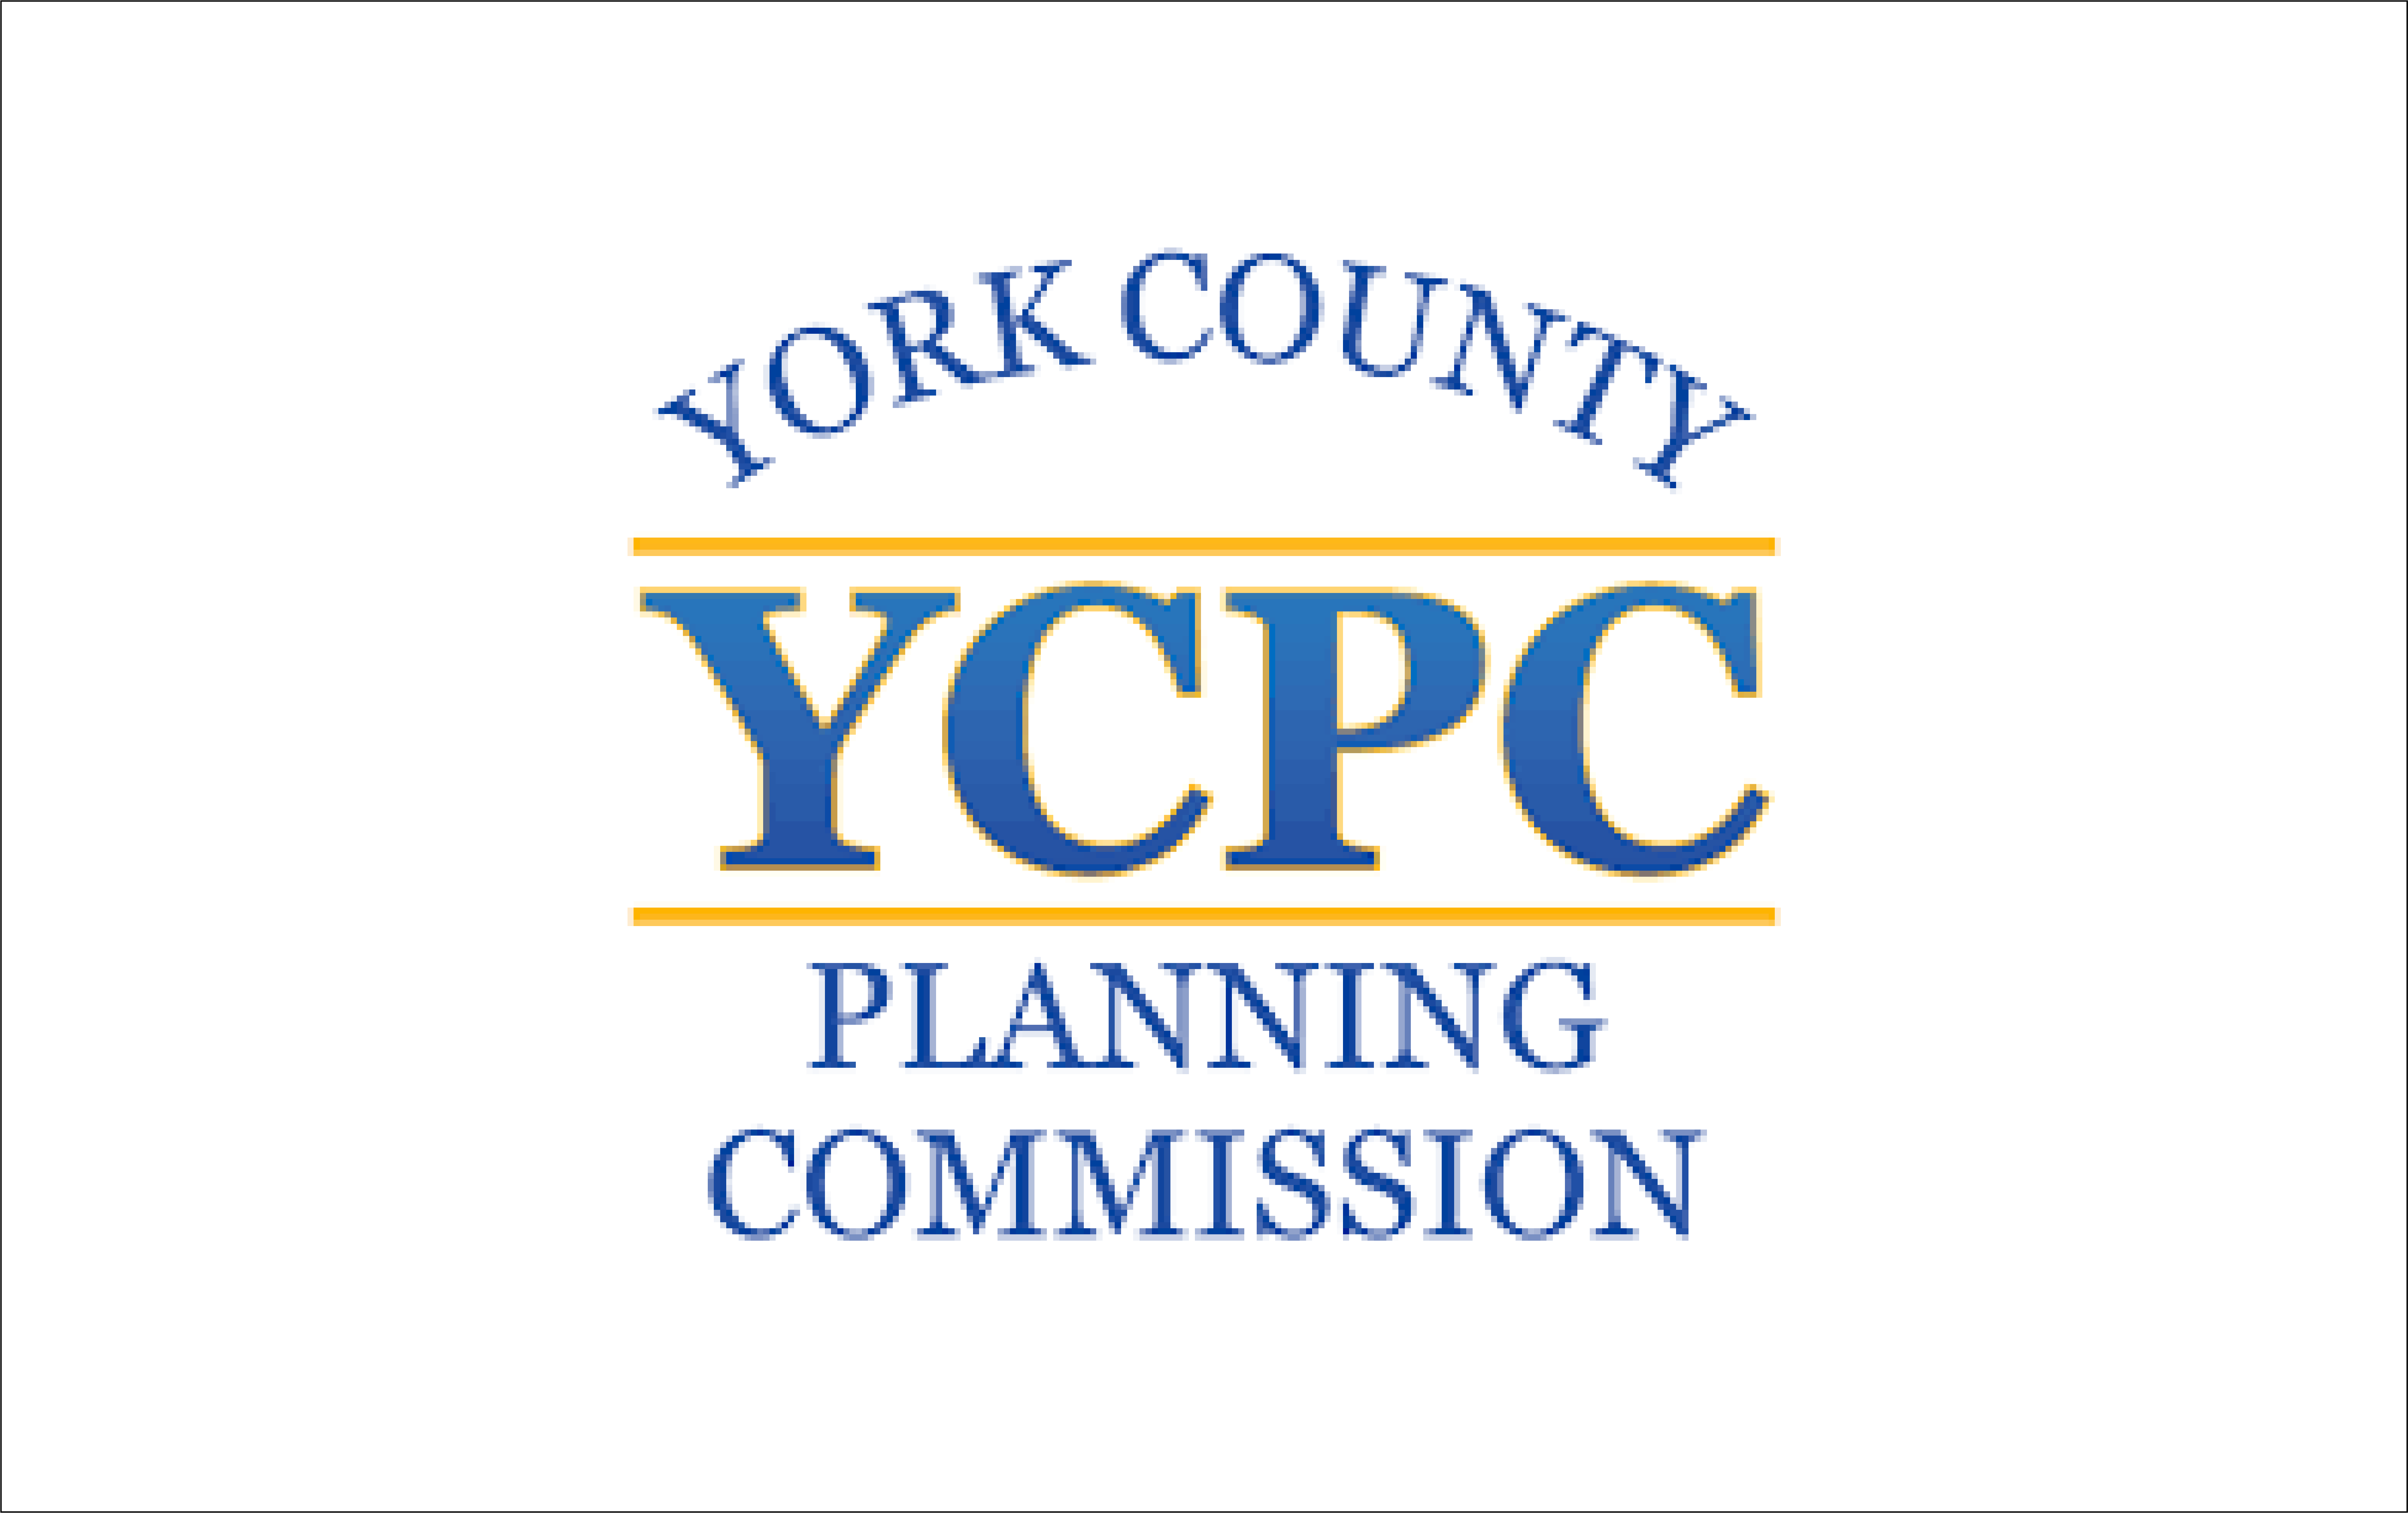 York County Planning Commission (YCPC) Logo